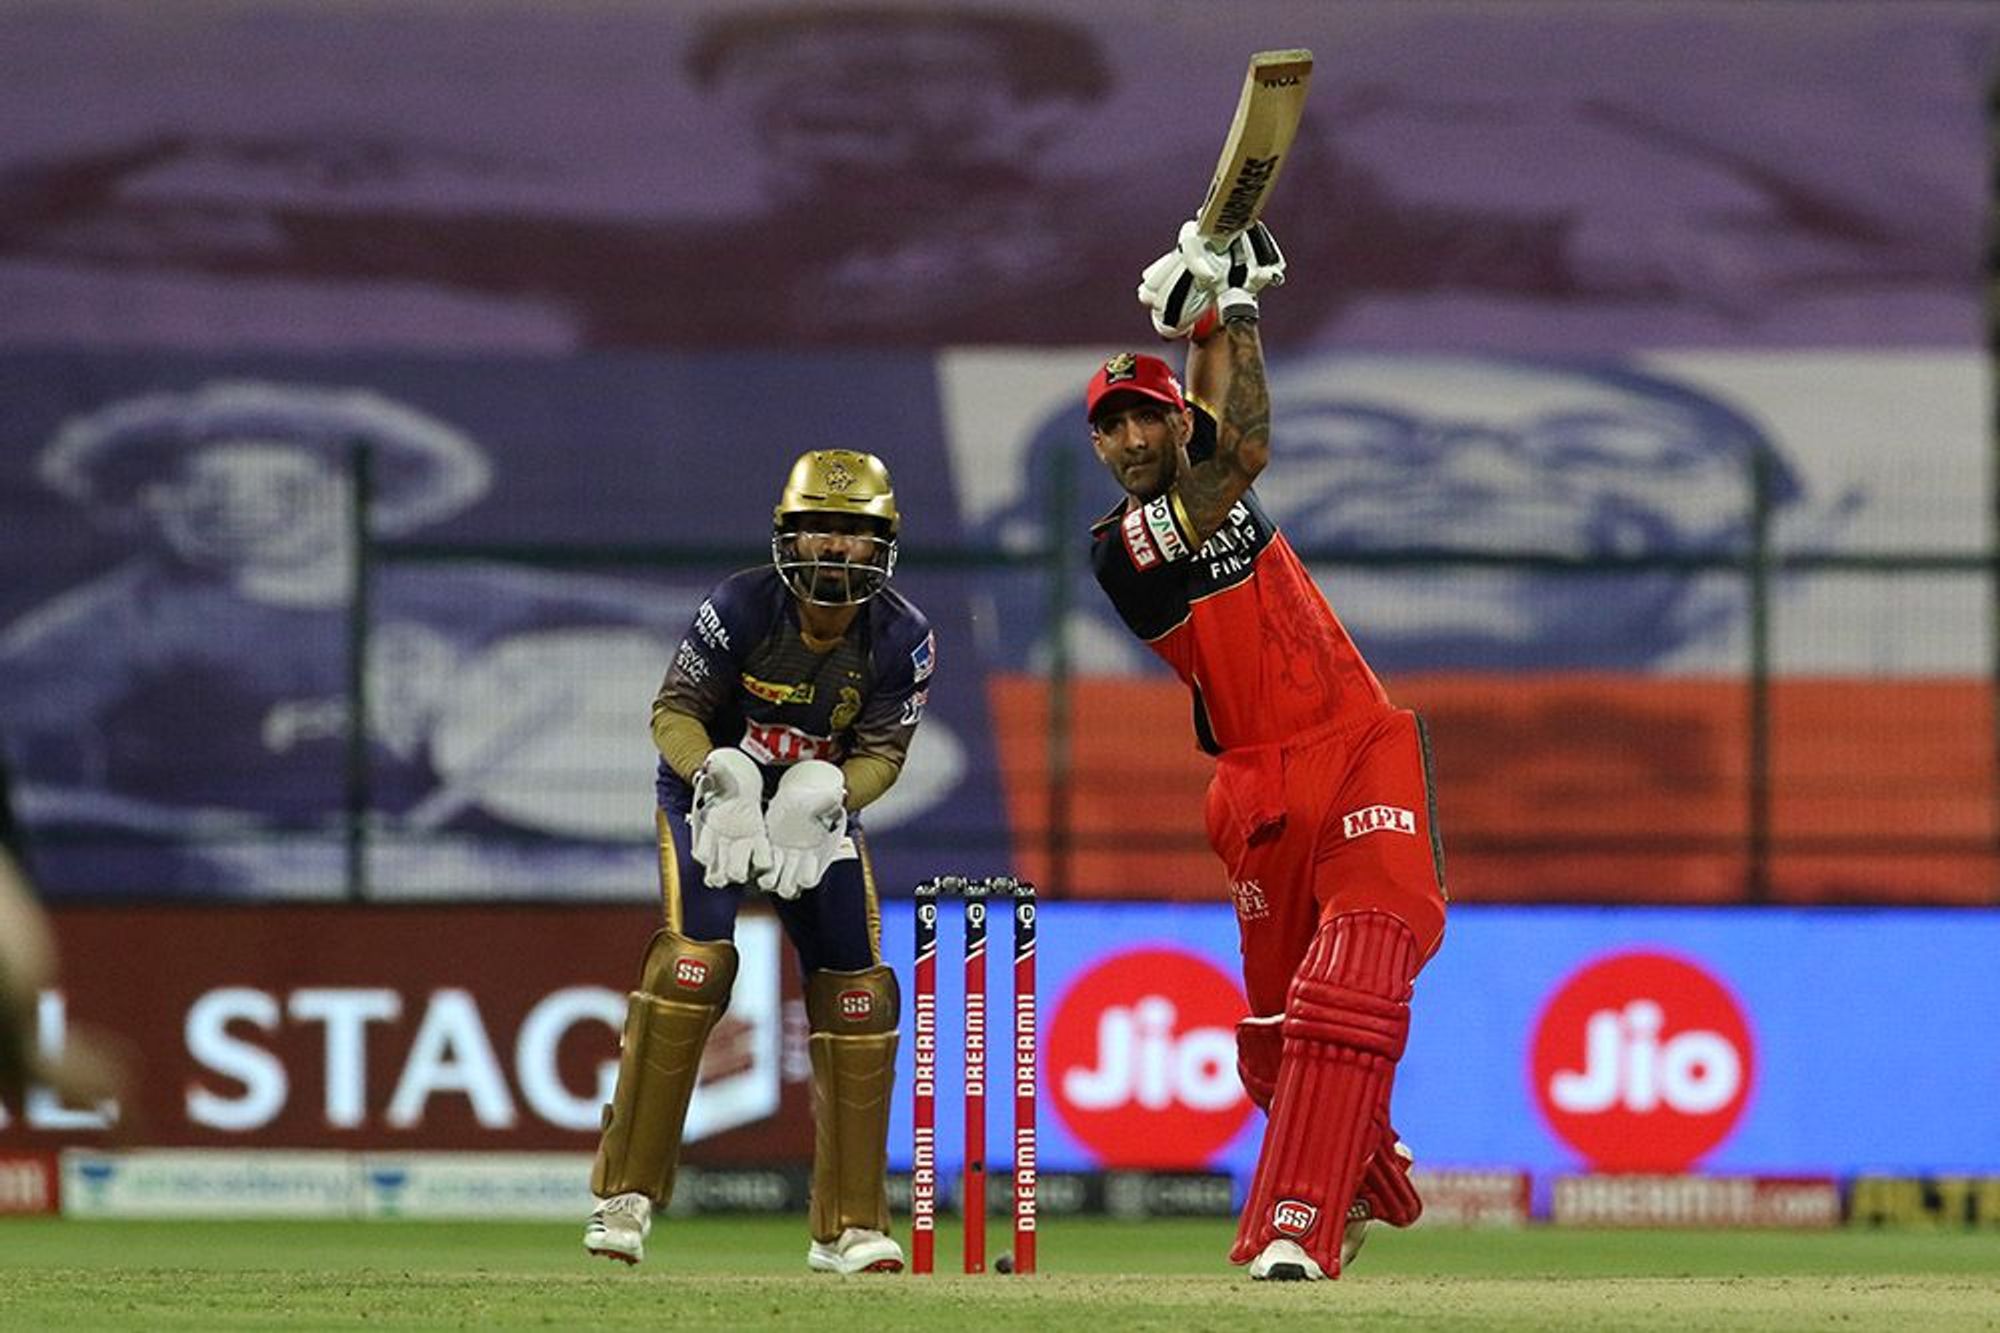 Gurkeerat remained unbeaten on 21 as RCB won the match by 8 wickets | BCCI/IPL